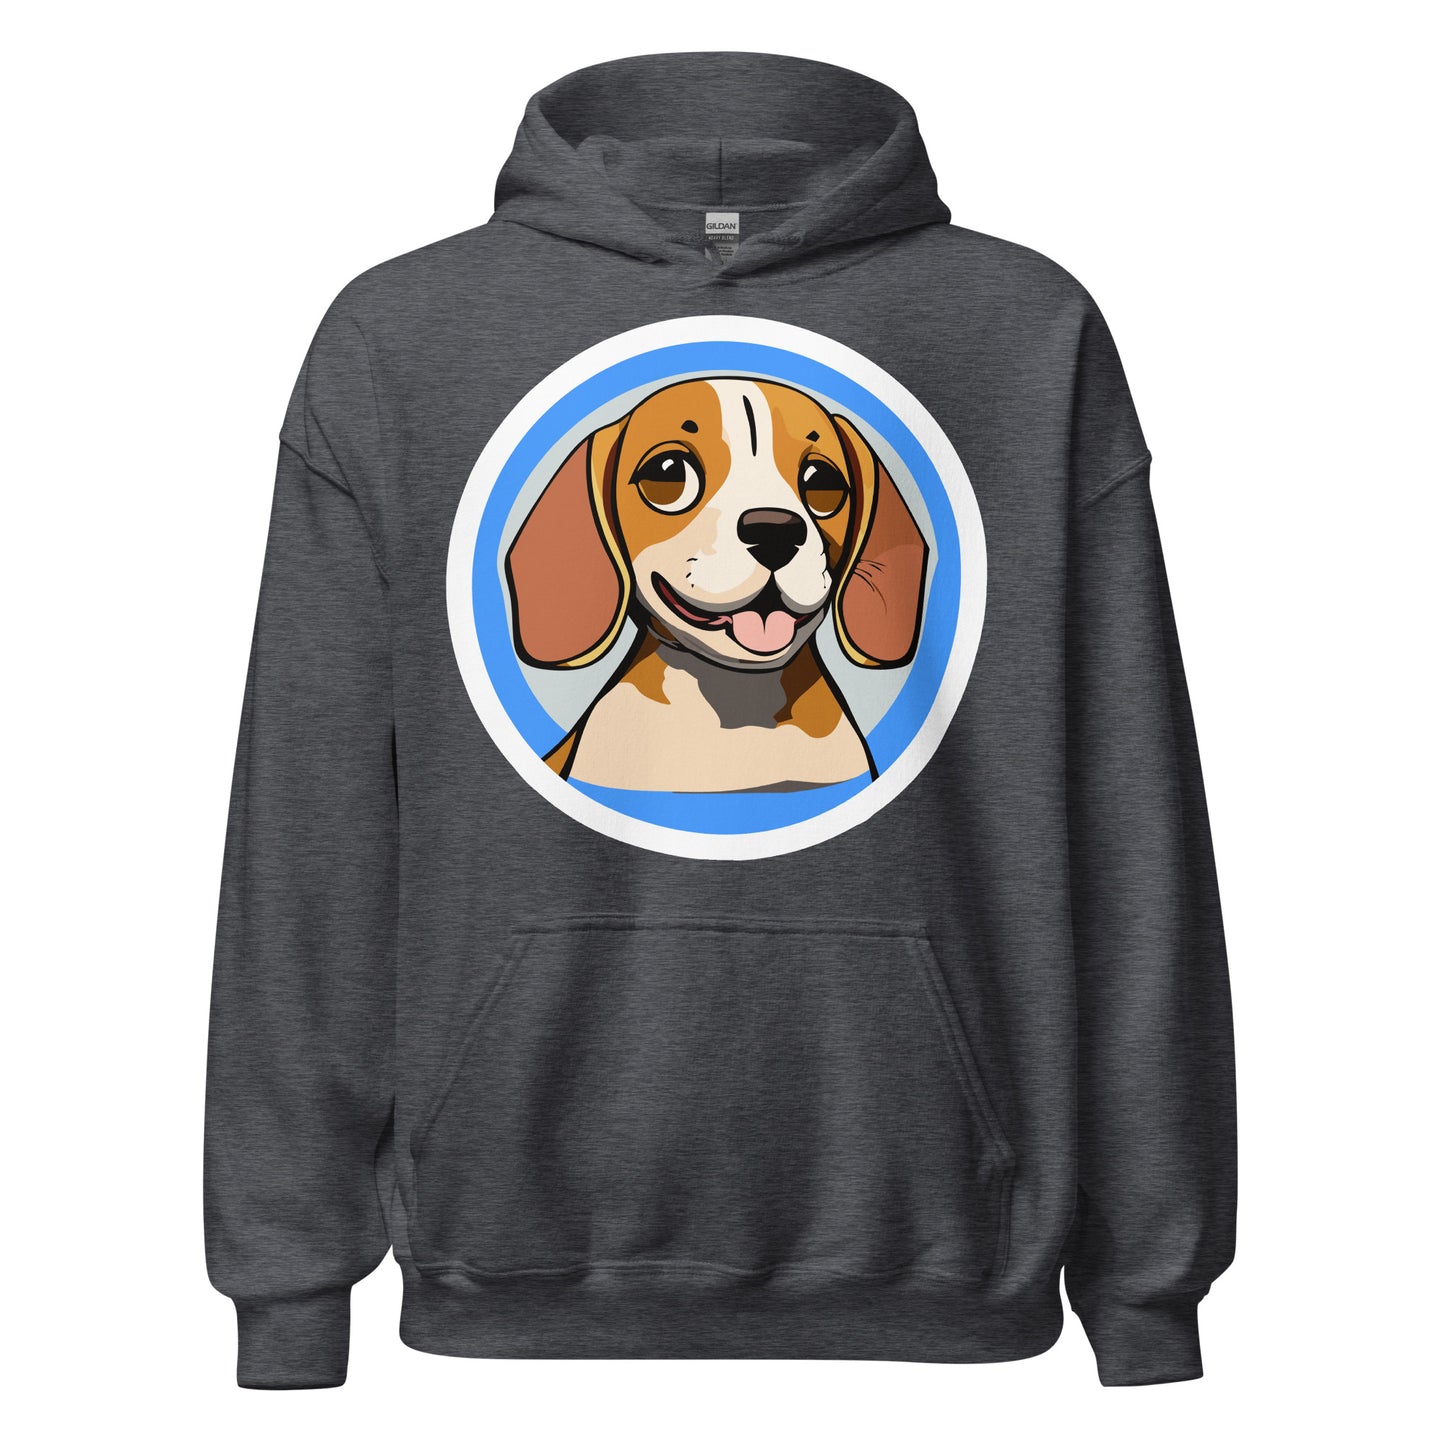 Comfy unisex hoodie for him or her with a cute beagle image, in heather grey color